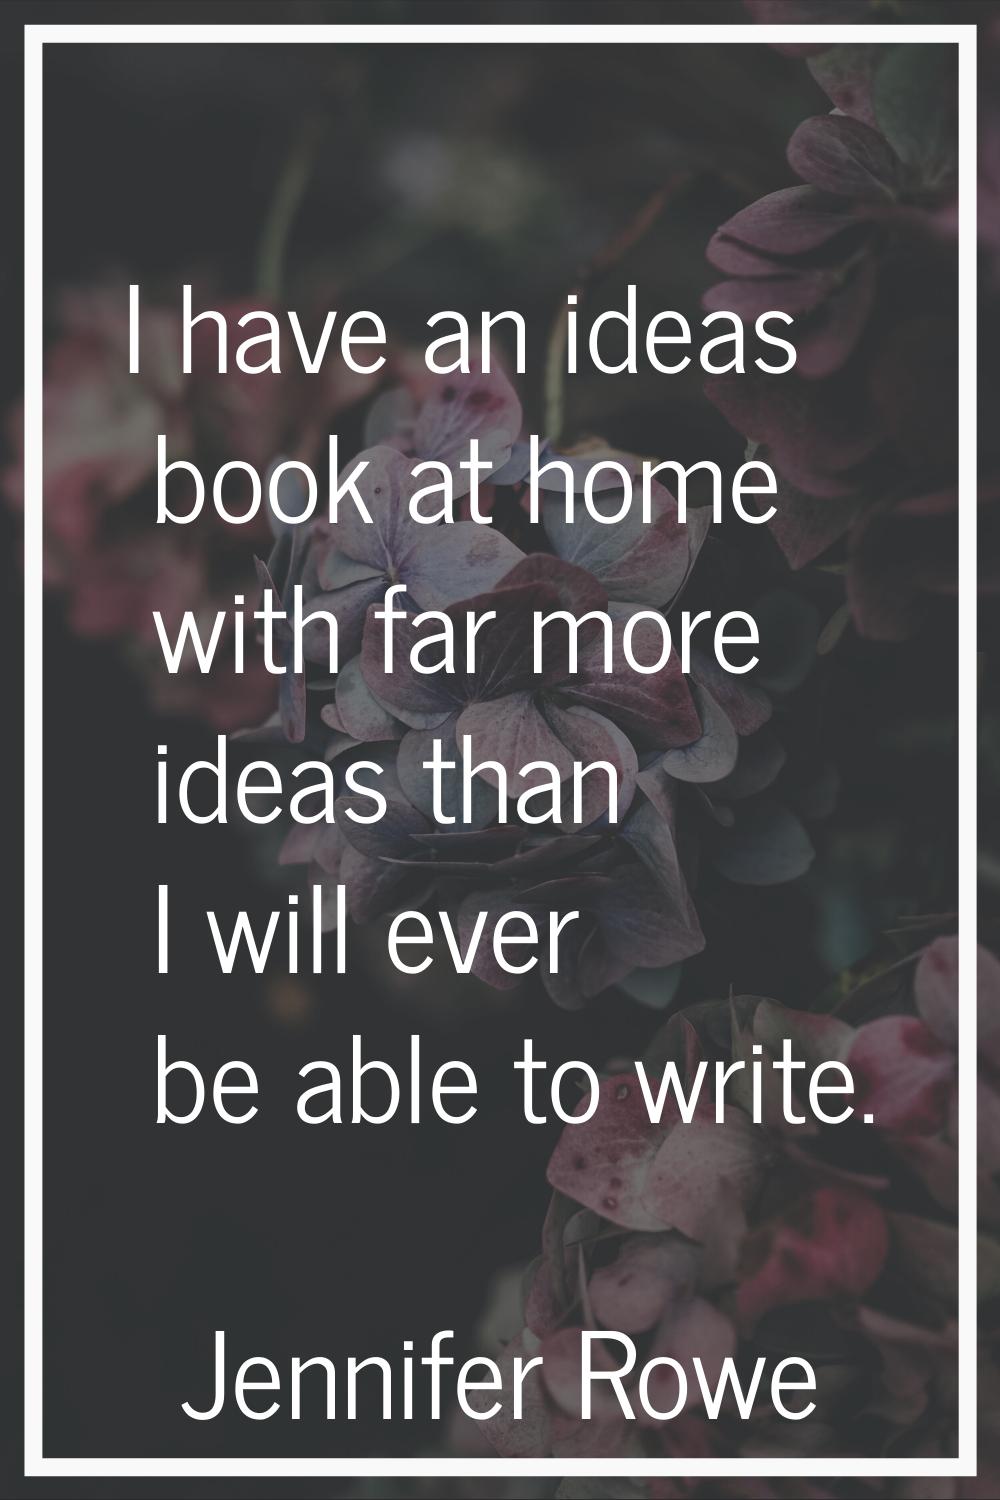 I have an ideas book at home with far more ideas than I will ever be able to write.